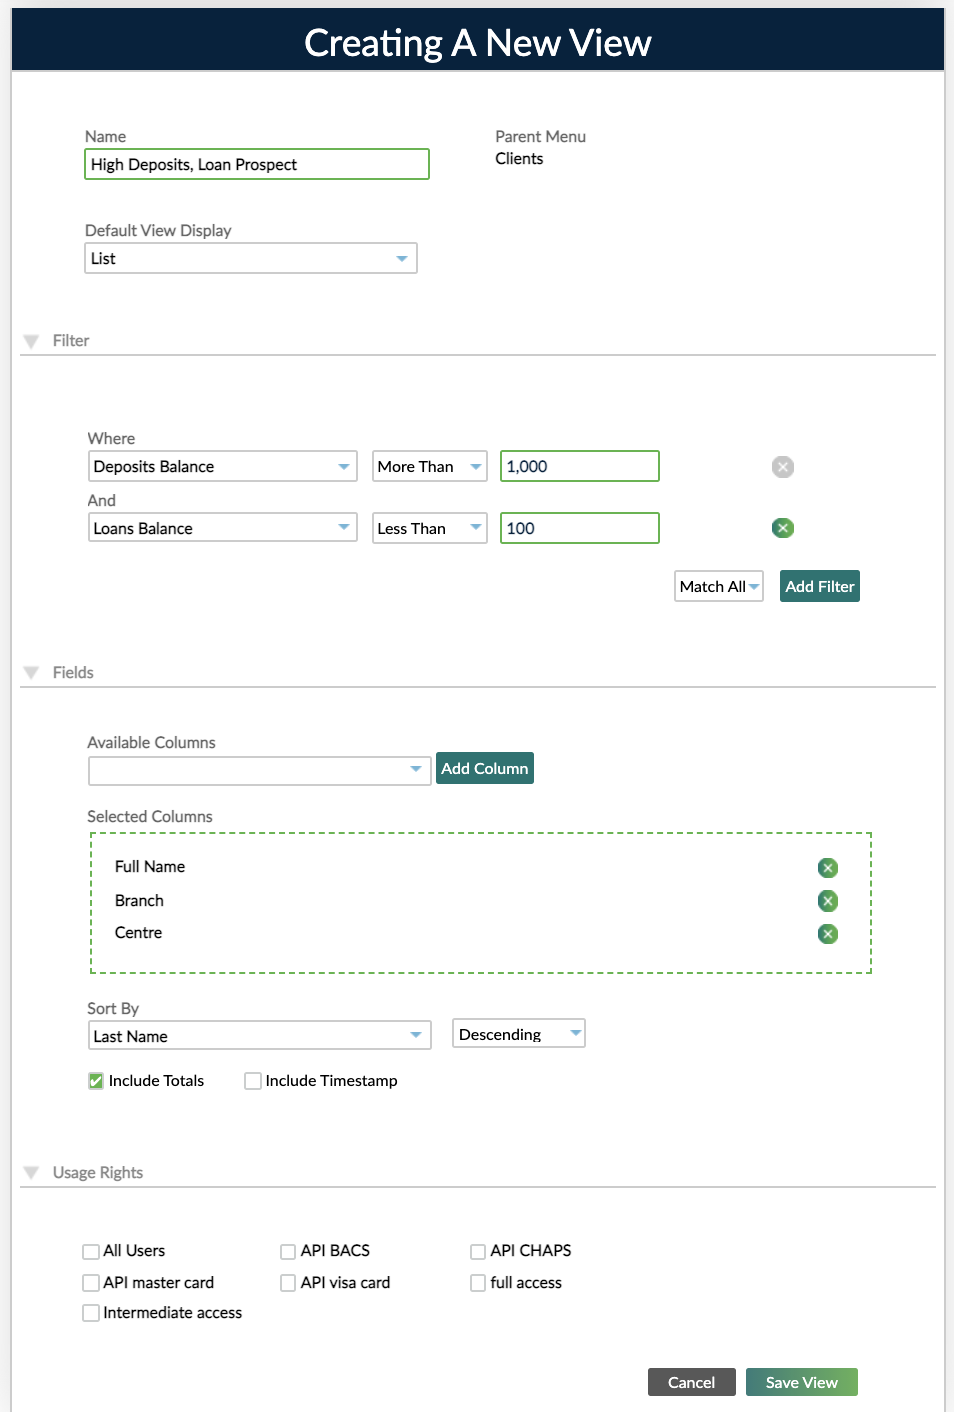 Creating a New View screen with Name and Default View Display fields and Filter, Fields and User Rights sections